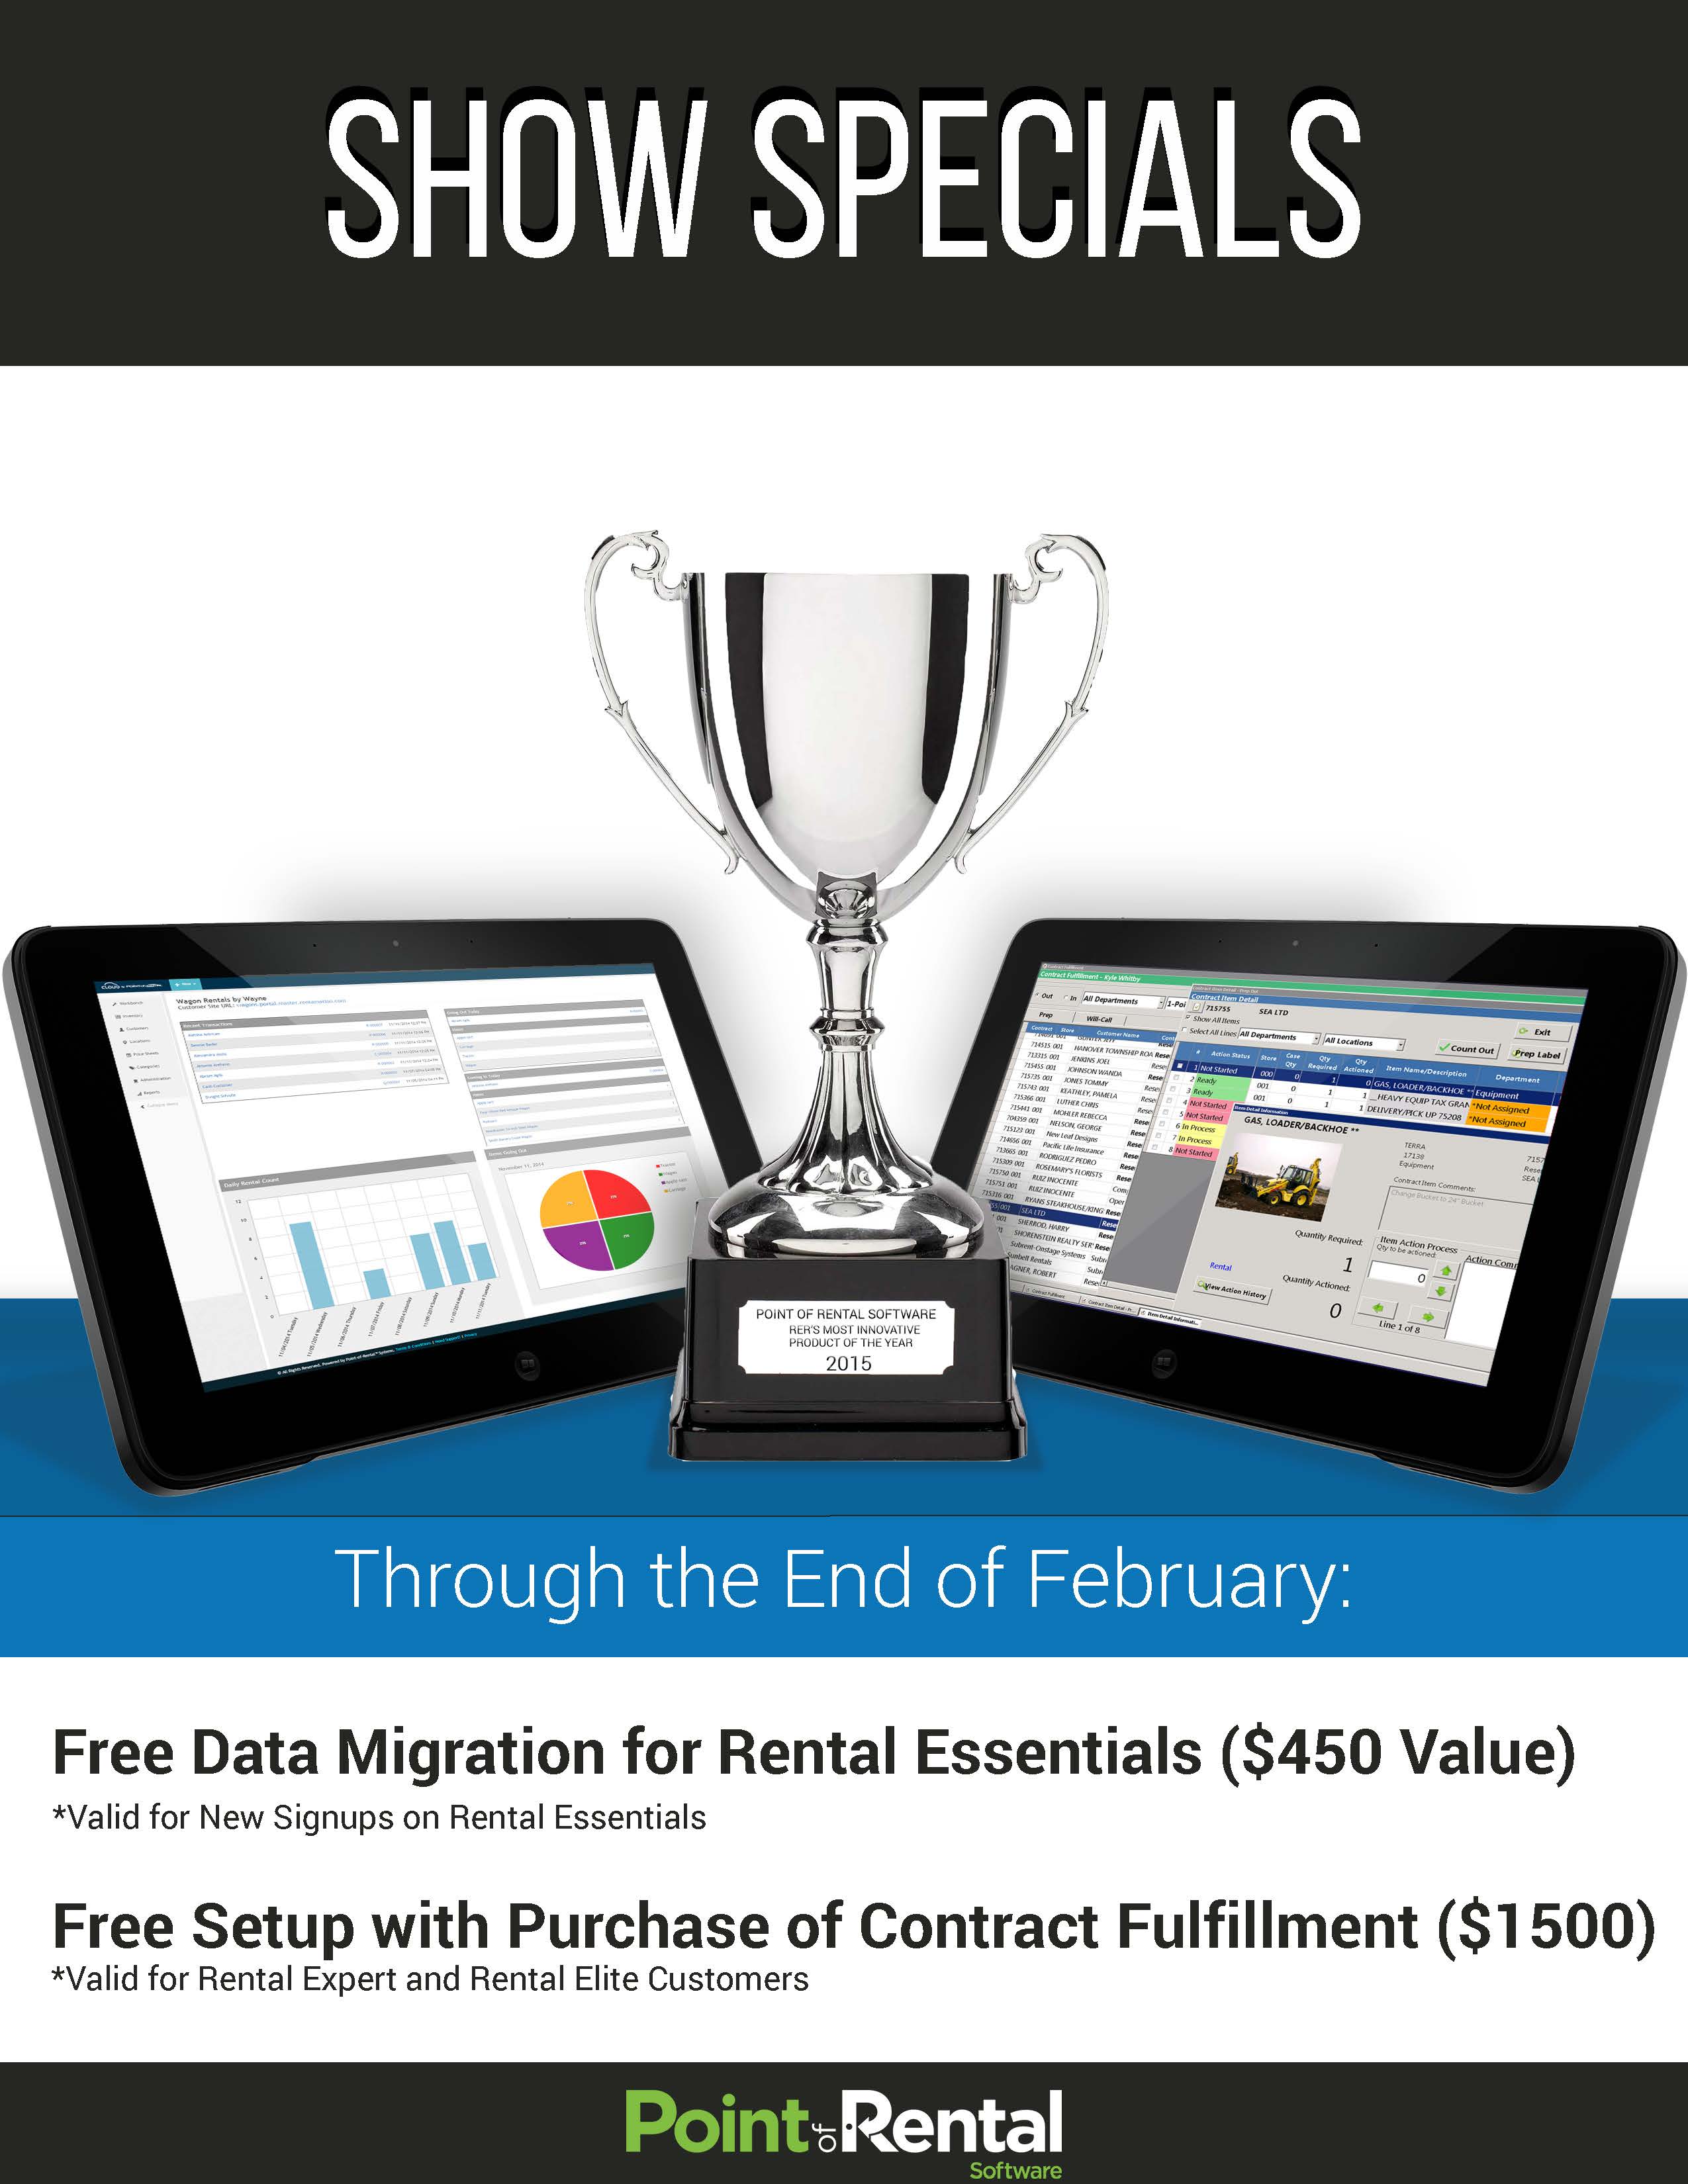 Point of rental software offers specials